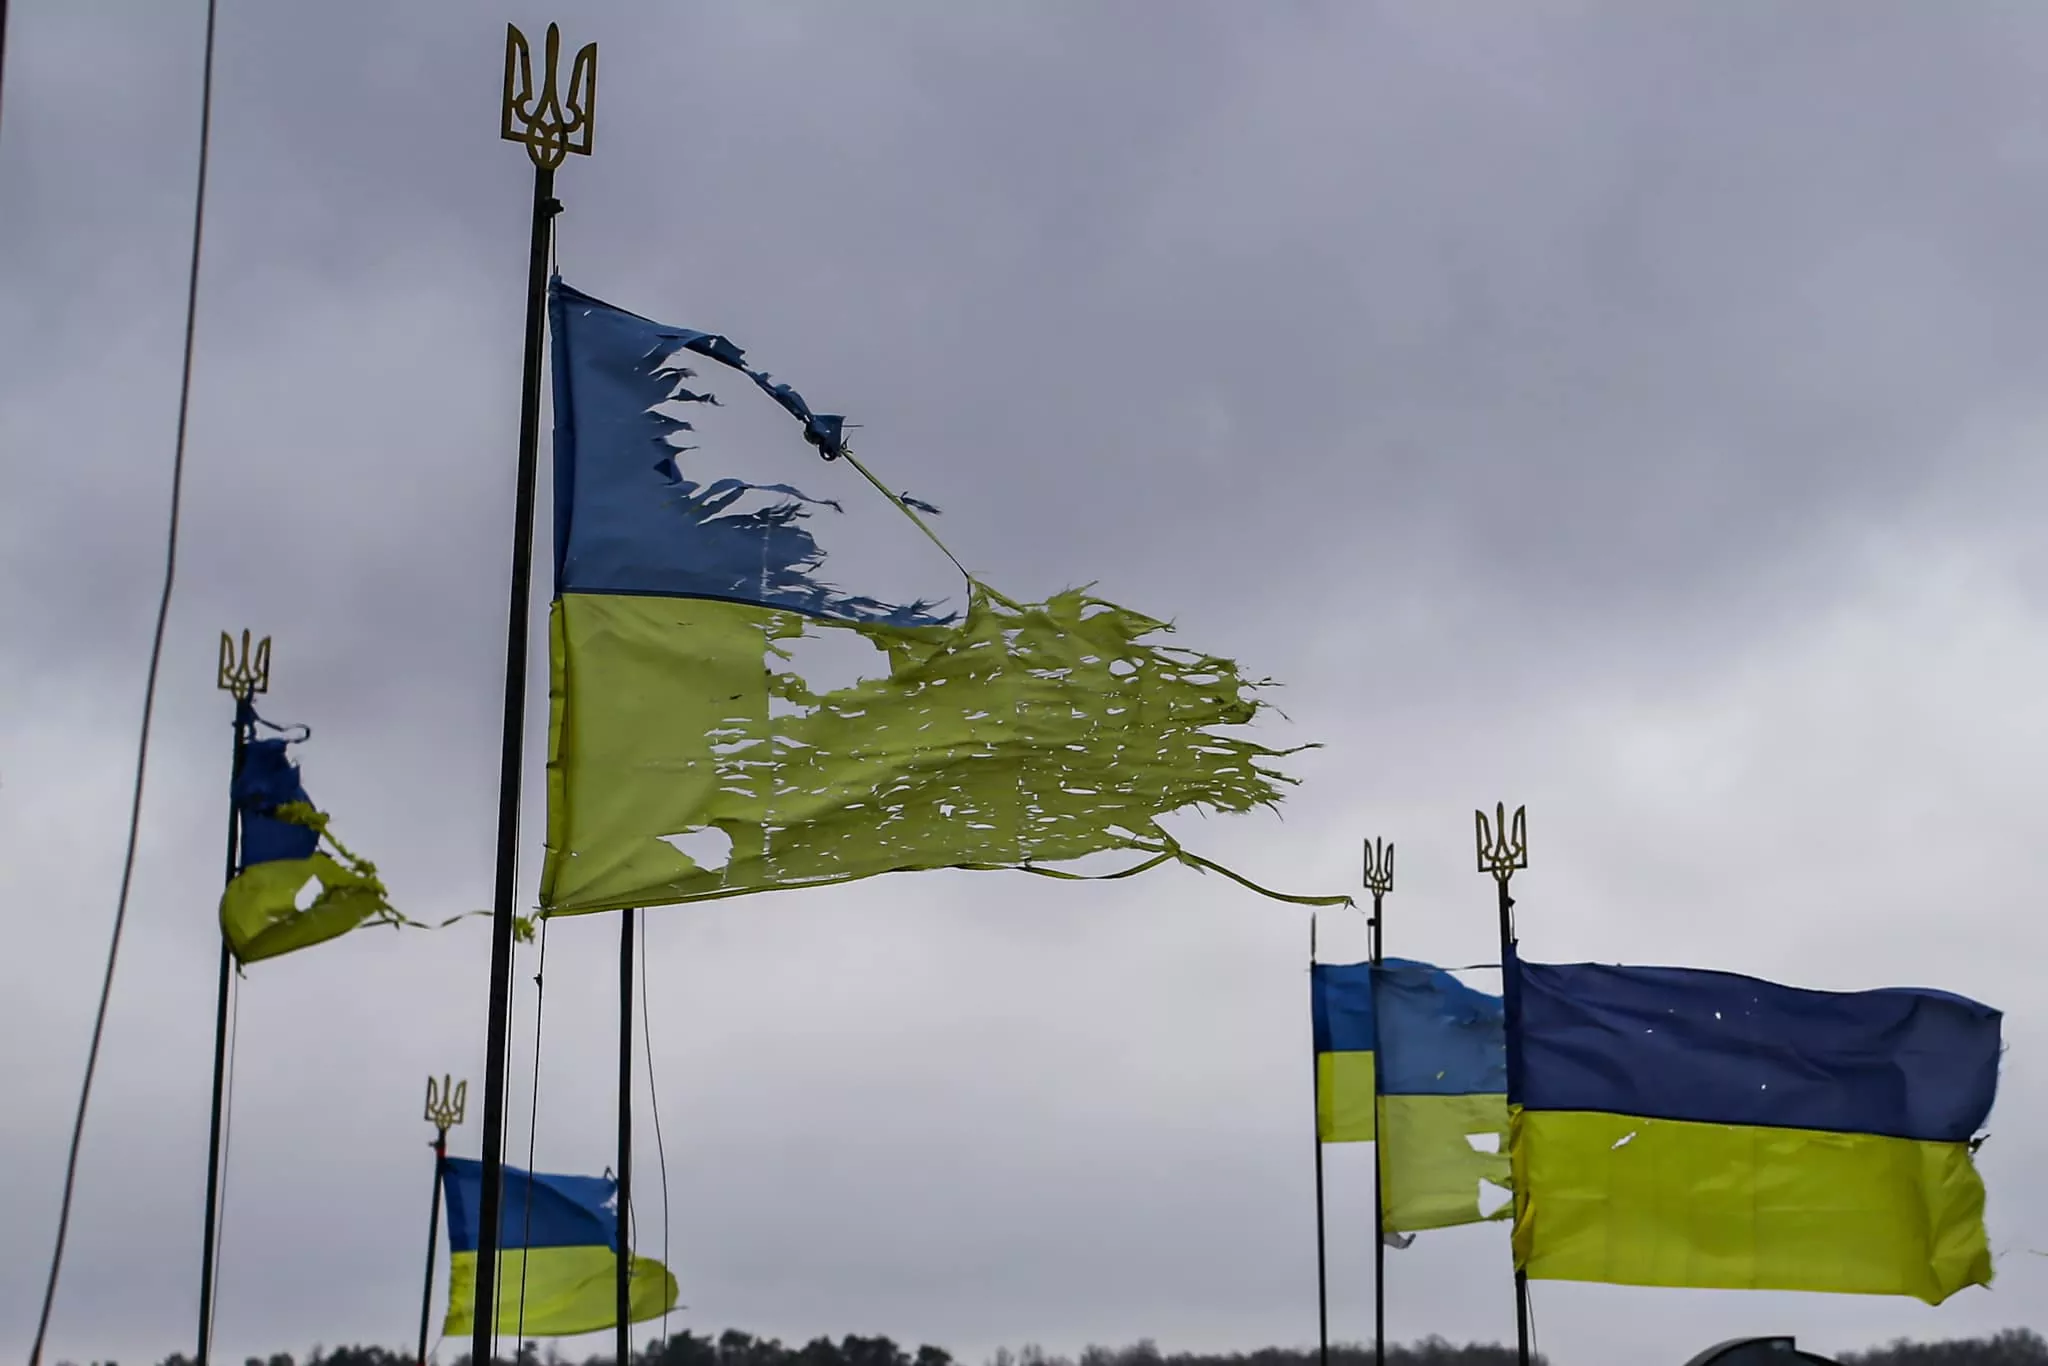 Ukrainian national flags shot at by Russian invaders but still flying over damaged gravestones of Ukrainian soldiers at the Yatsevo cemetery in Chernihiv after breaking the Russian siege. April 6, 2022. The Russo-Ukrainian War 2014-present. Photo: Stas Yurchenko via FB.